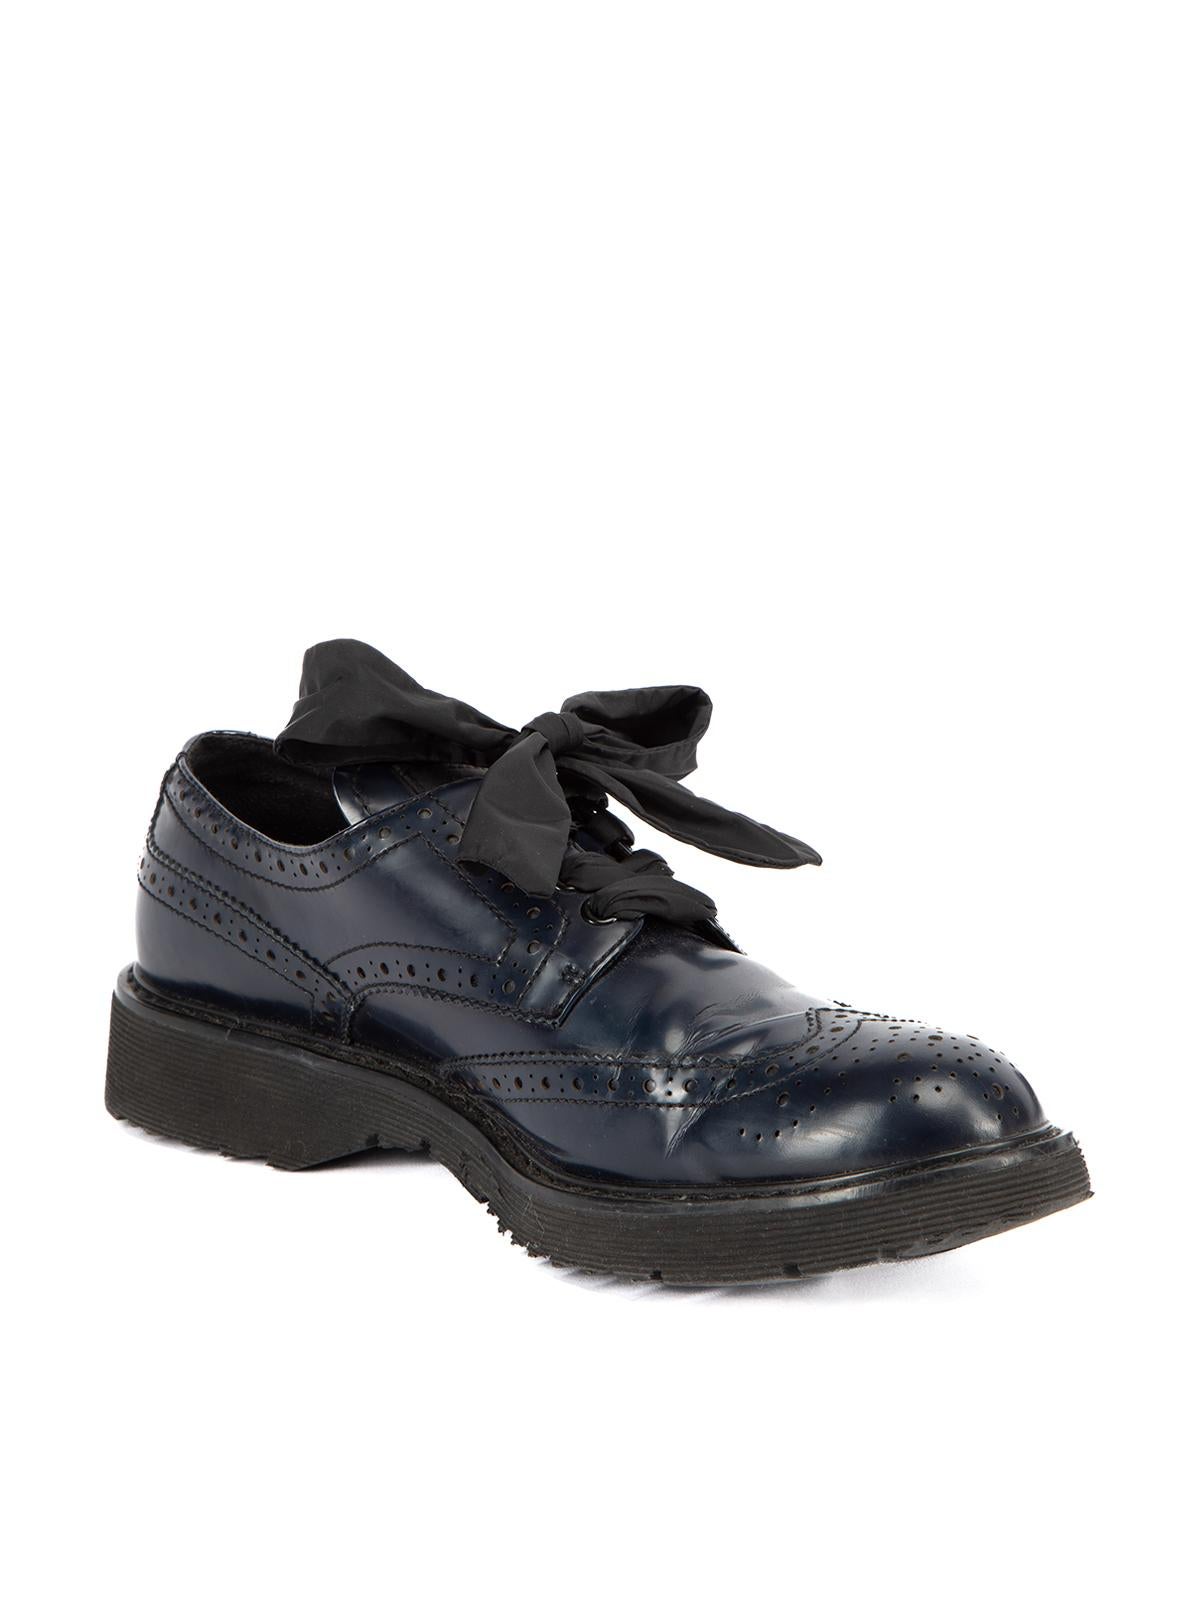 CONDITION is Very good. Minimum wear to shoes is evident. There is some creasing to the leather exterior and very light wear to the soles on this used Prada designer resale item. This item comes with the original dust bag. Details Black Leather